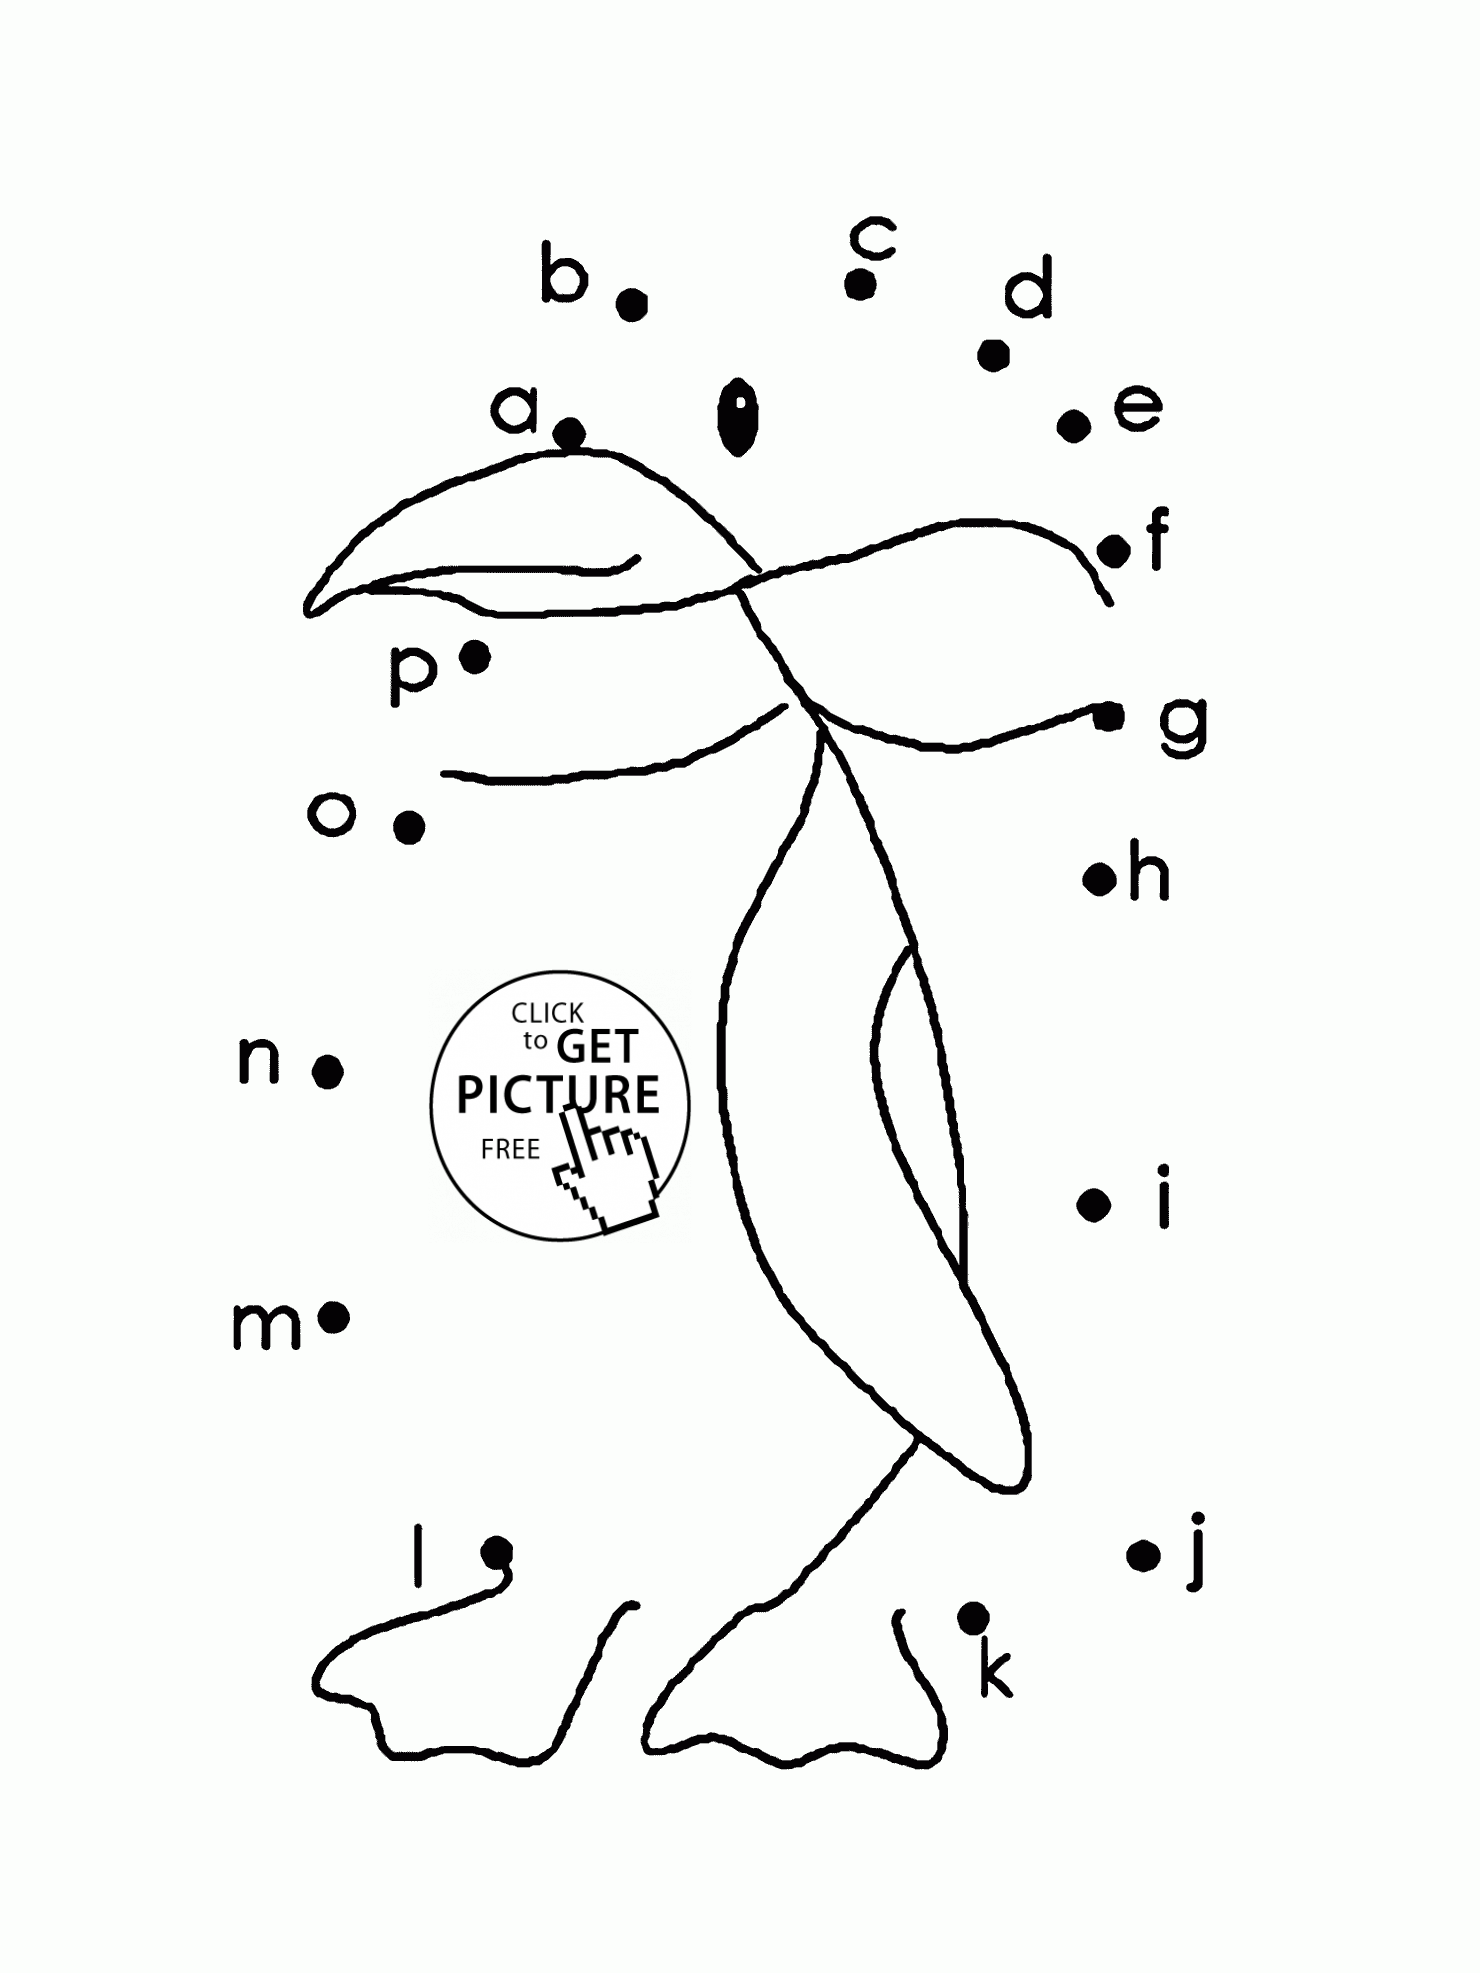 Penguin Connect the Dots coloring pages for preschoolers, dot to ...